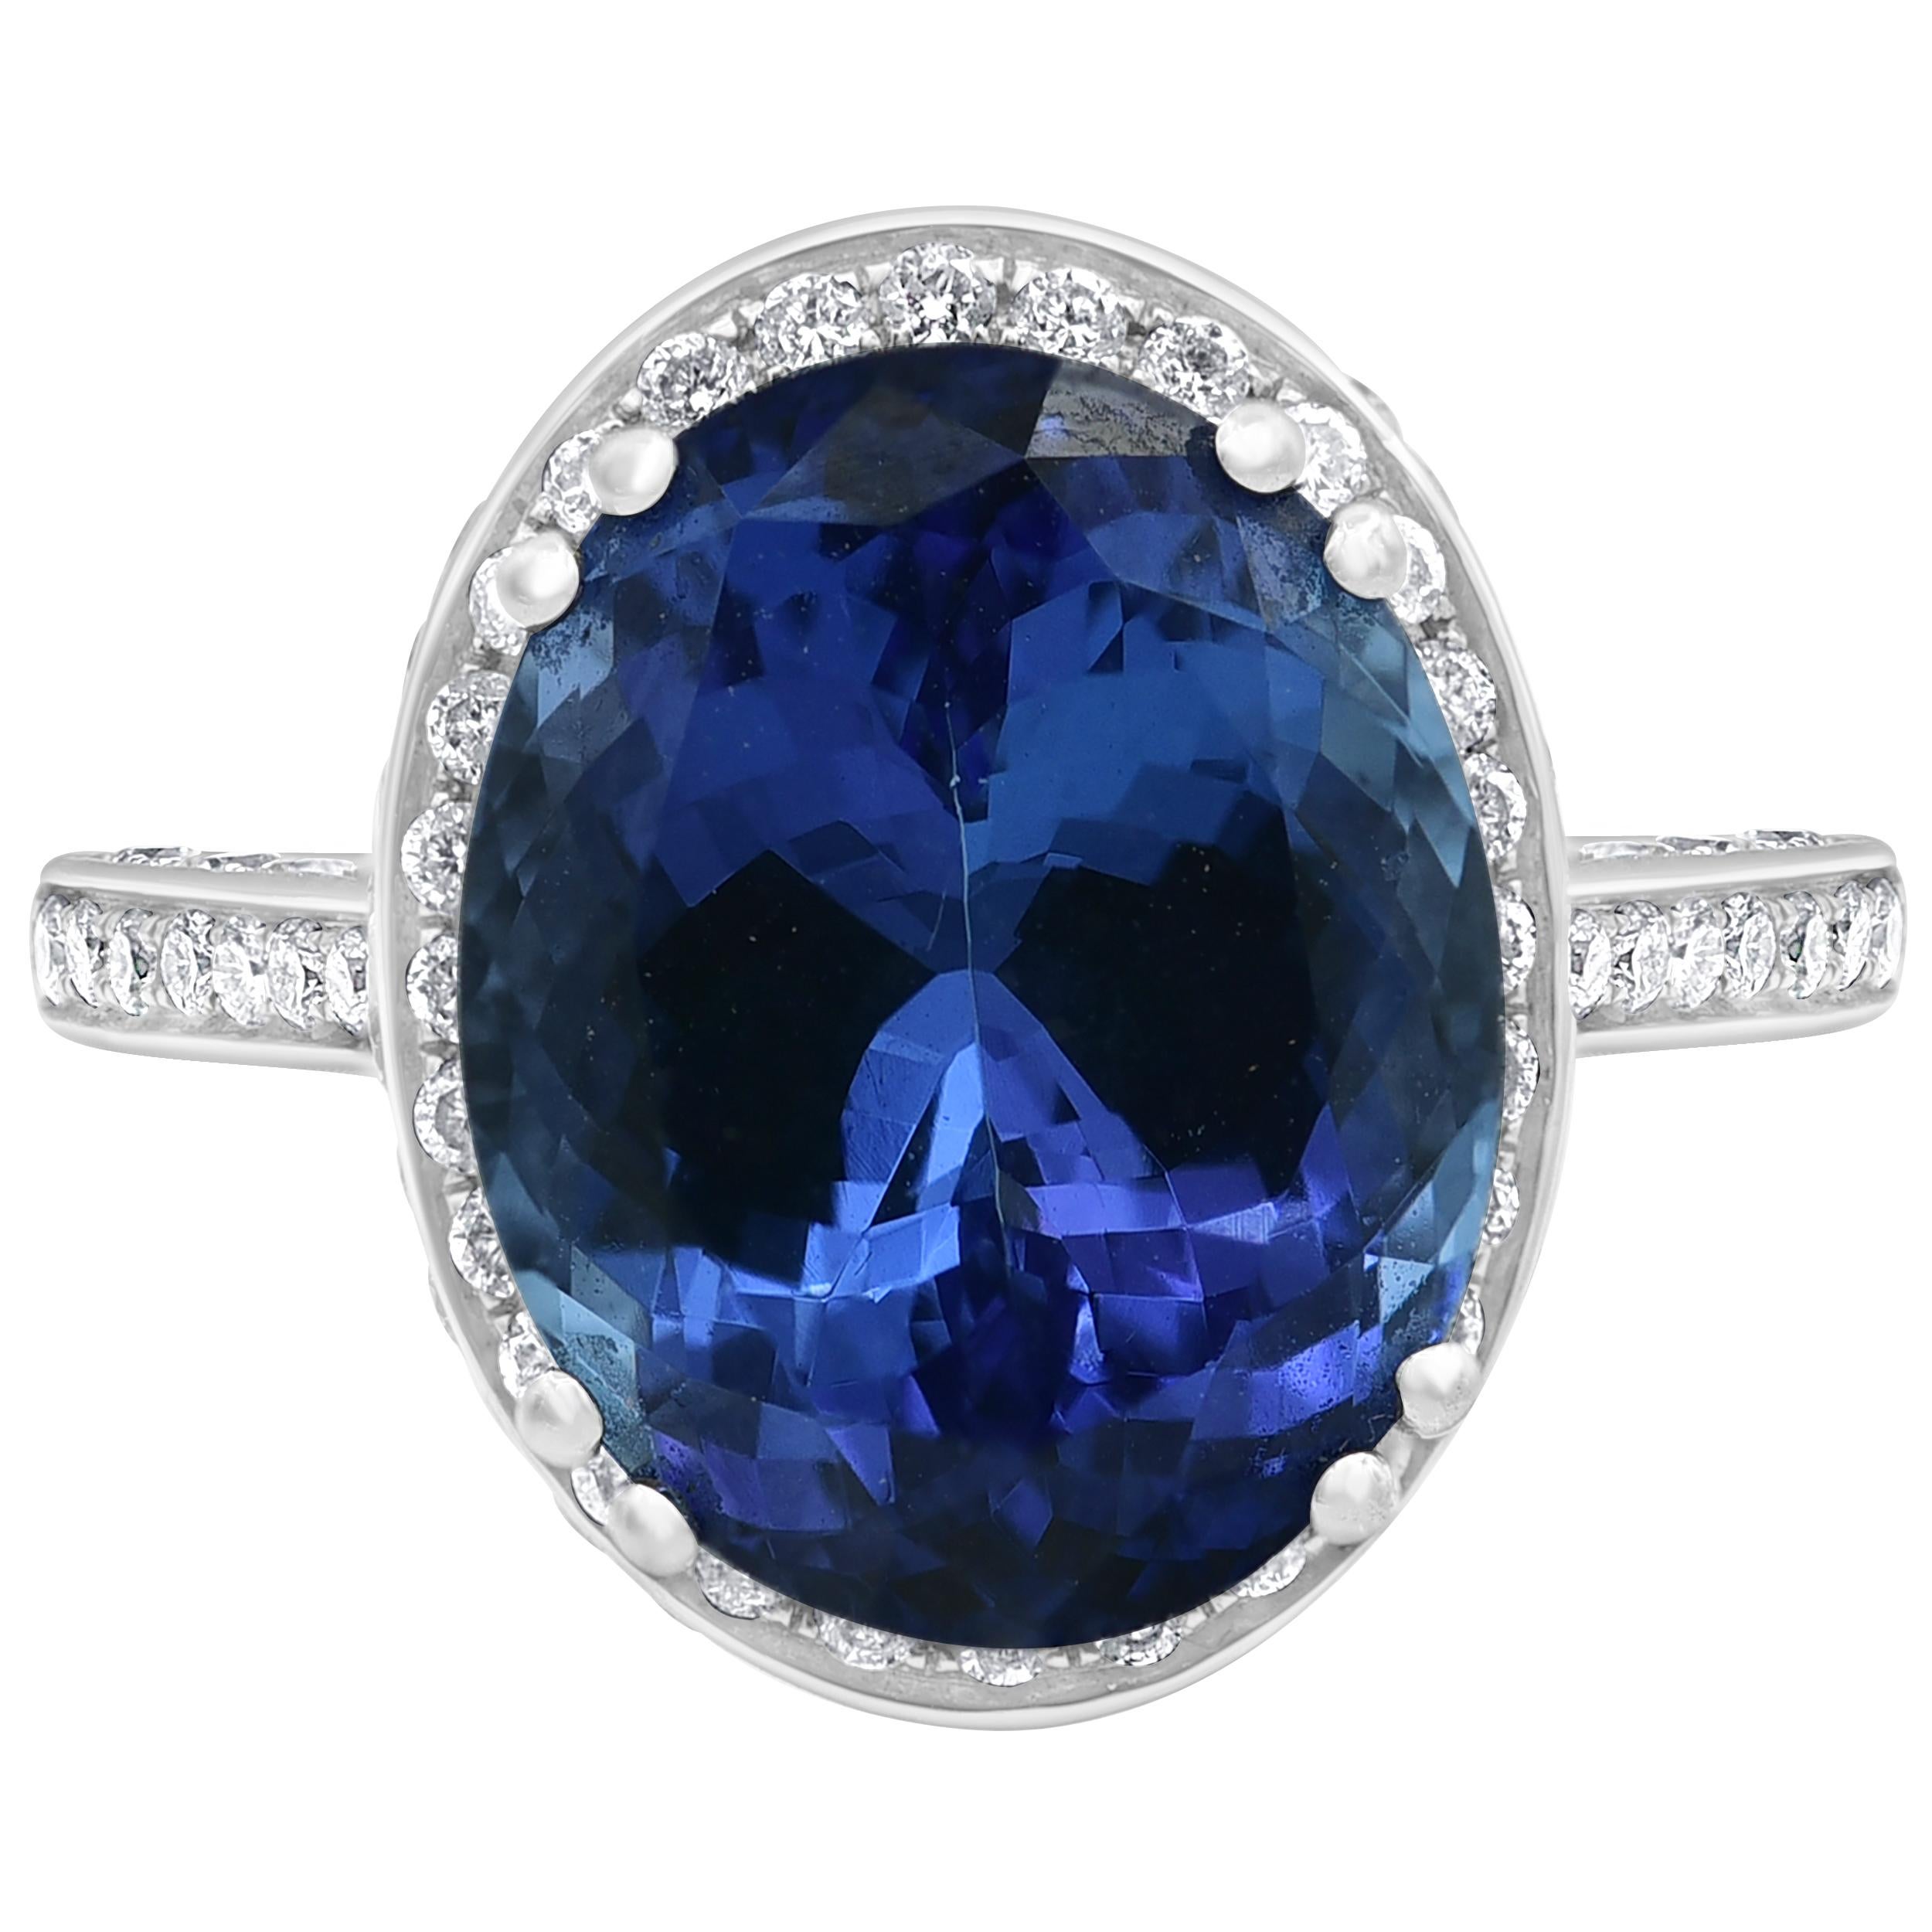 So intriguing, this 7.50 CTW Tanzanite gemstone and 0.90 CTW diamond ring create a sensation. Crafted in cool 18K white gold, this stunning style features oval-shaped violet-blue Tanzanite wrapped in a halo frame of shimmering diamonds.